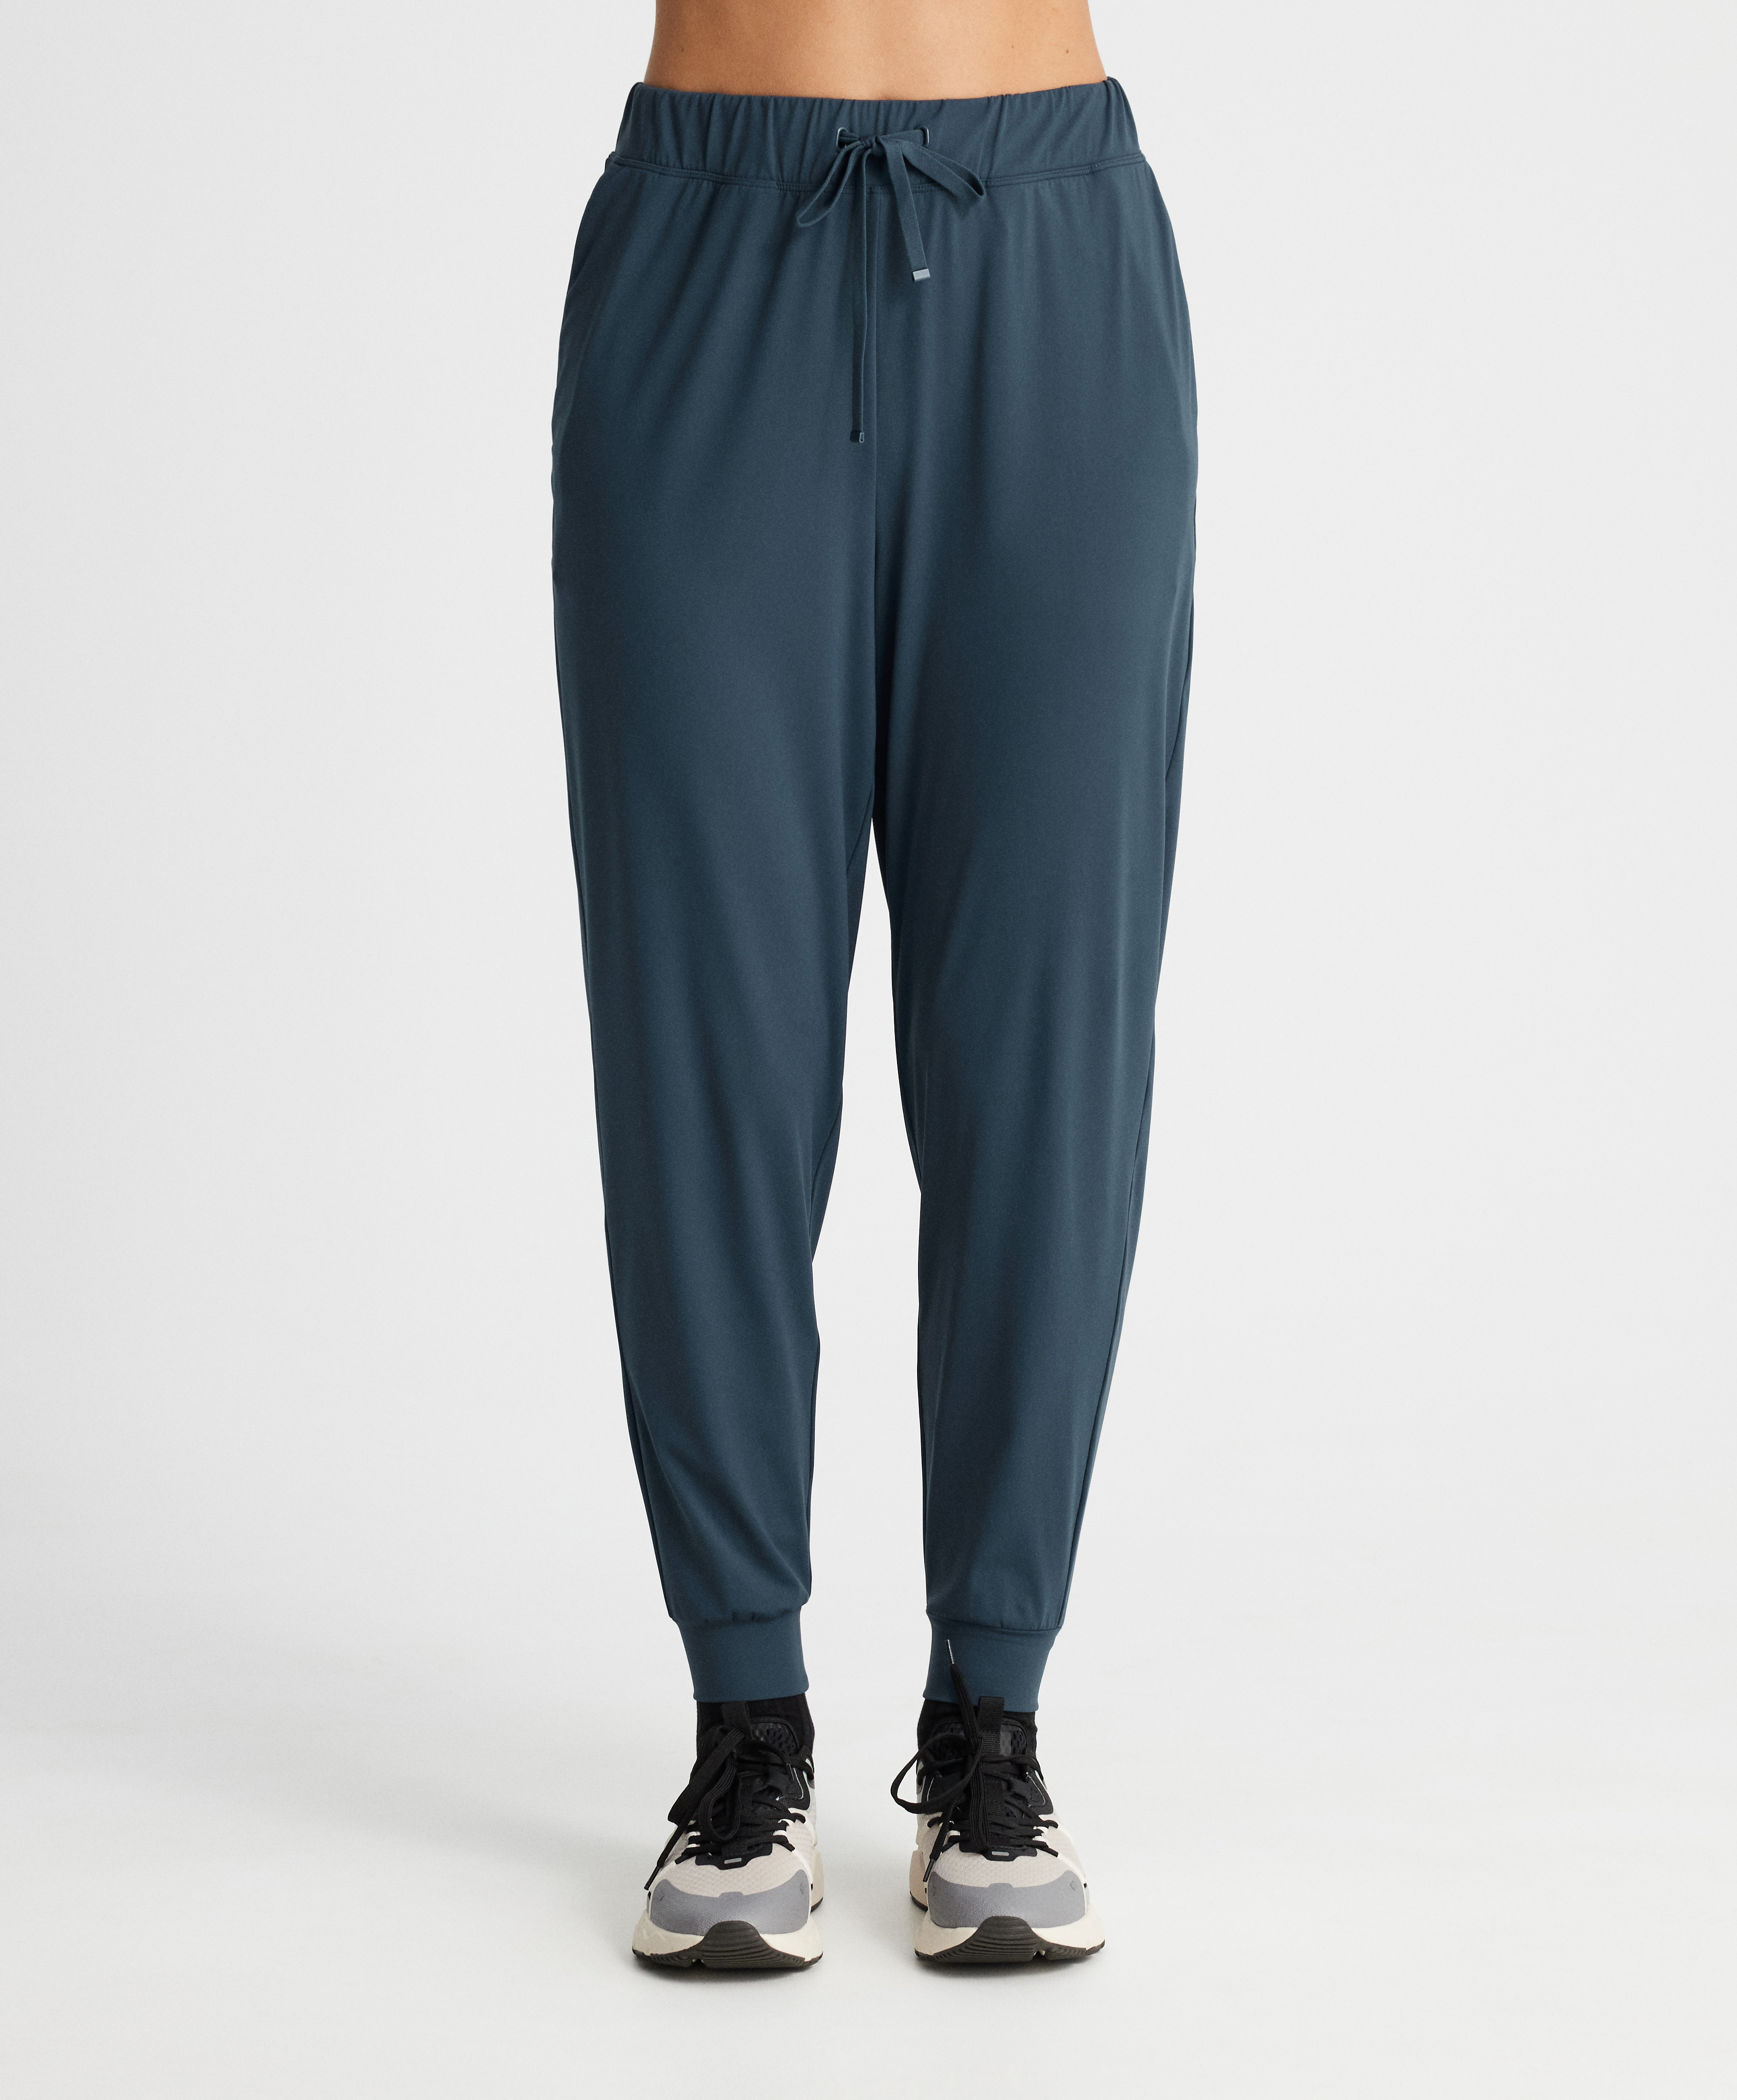 Classic light touch joggers